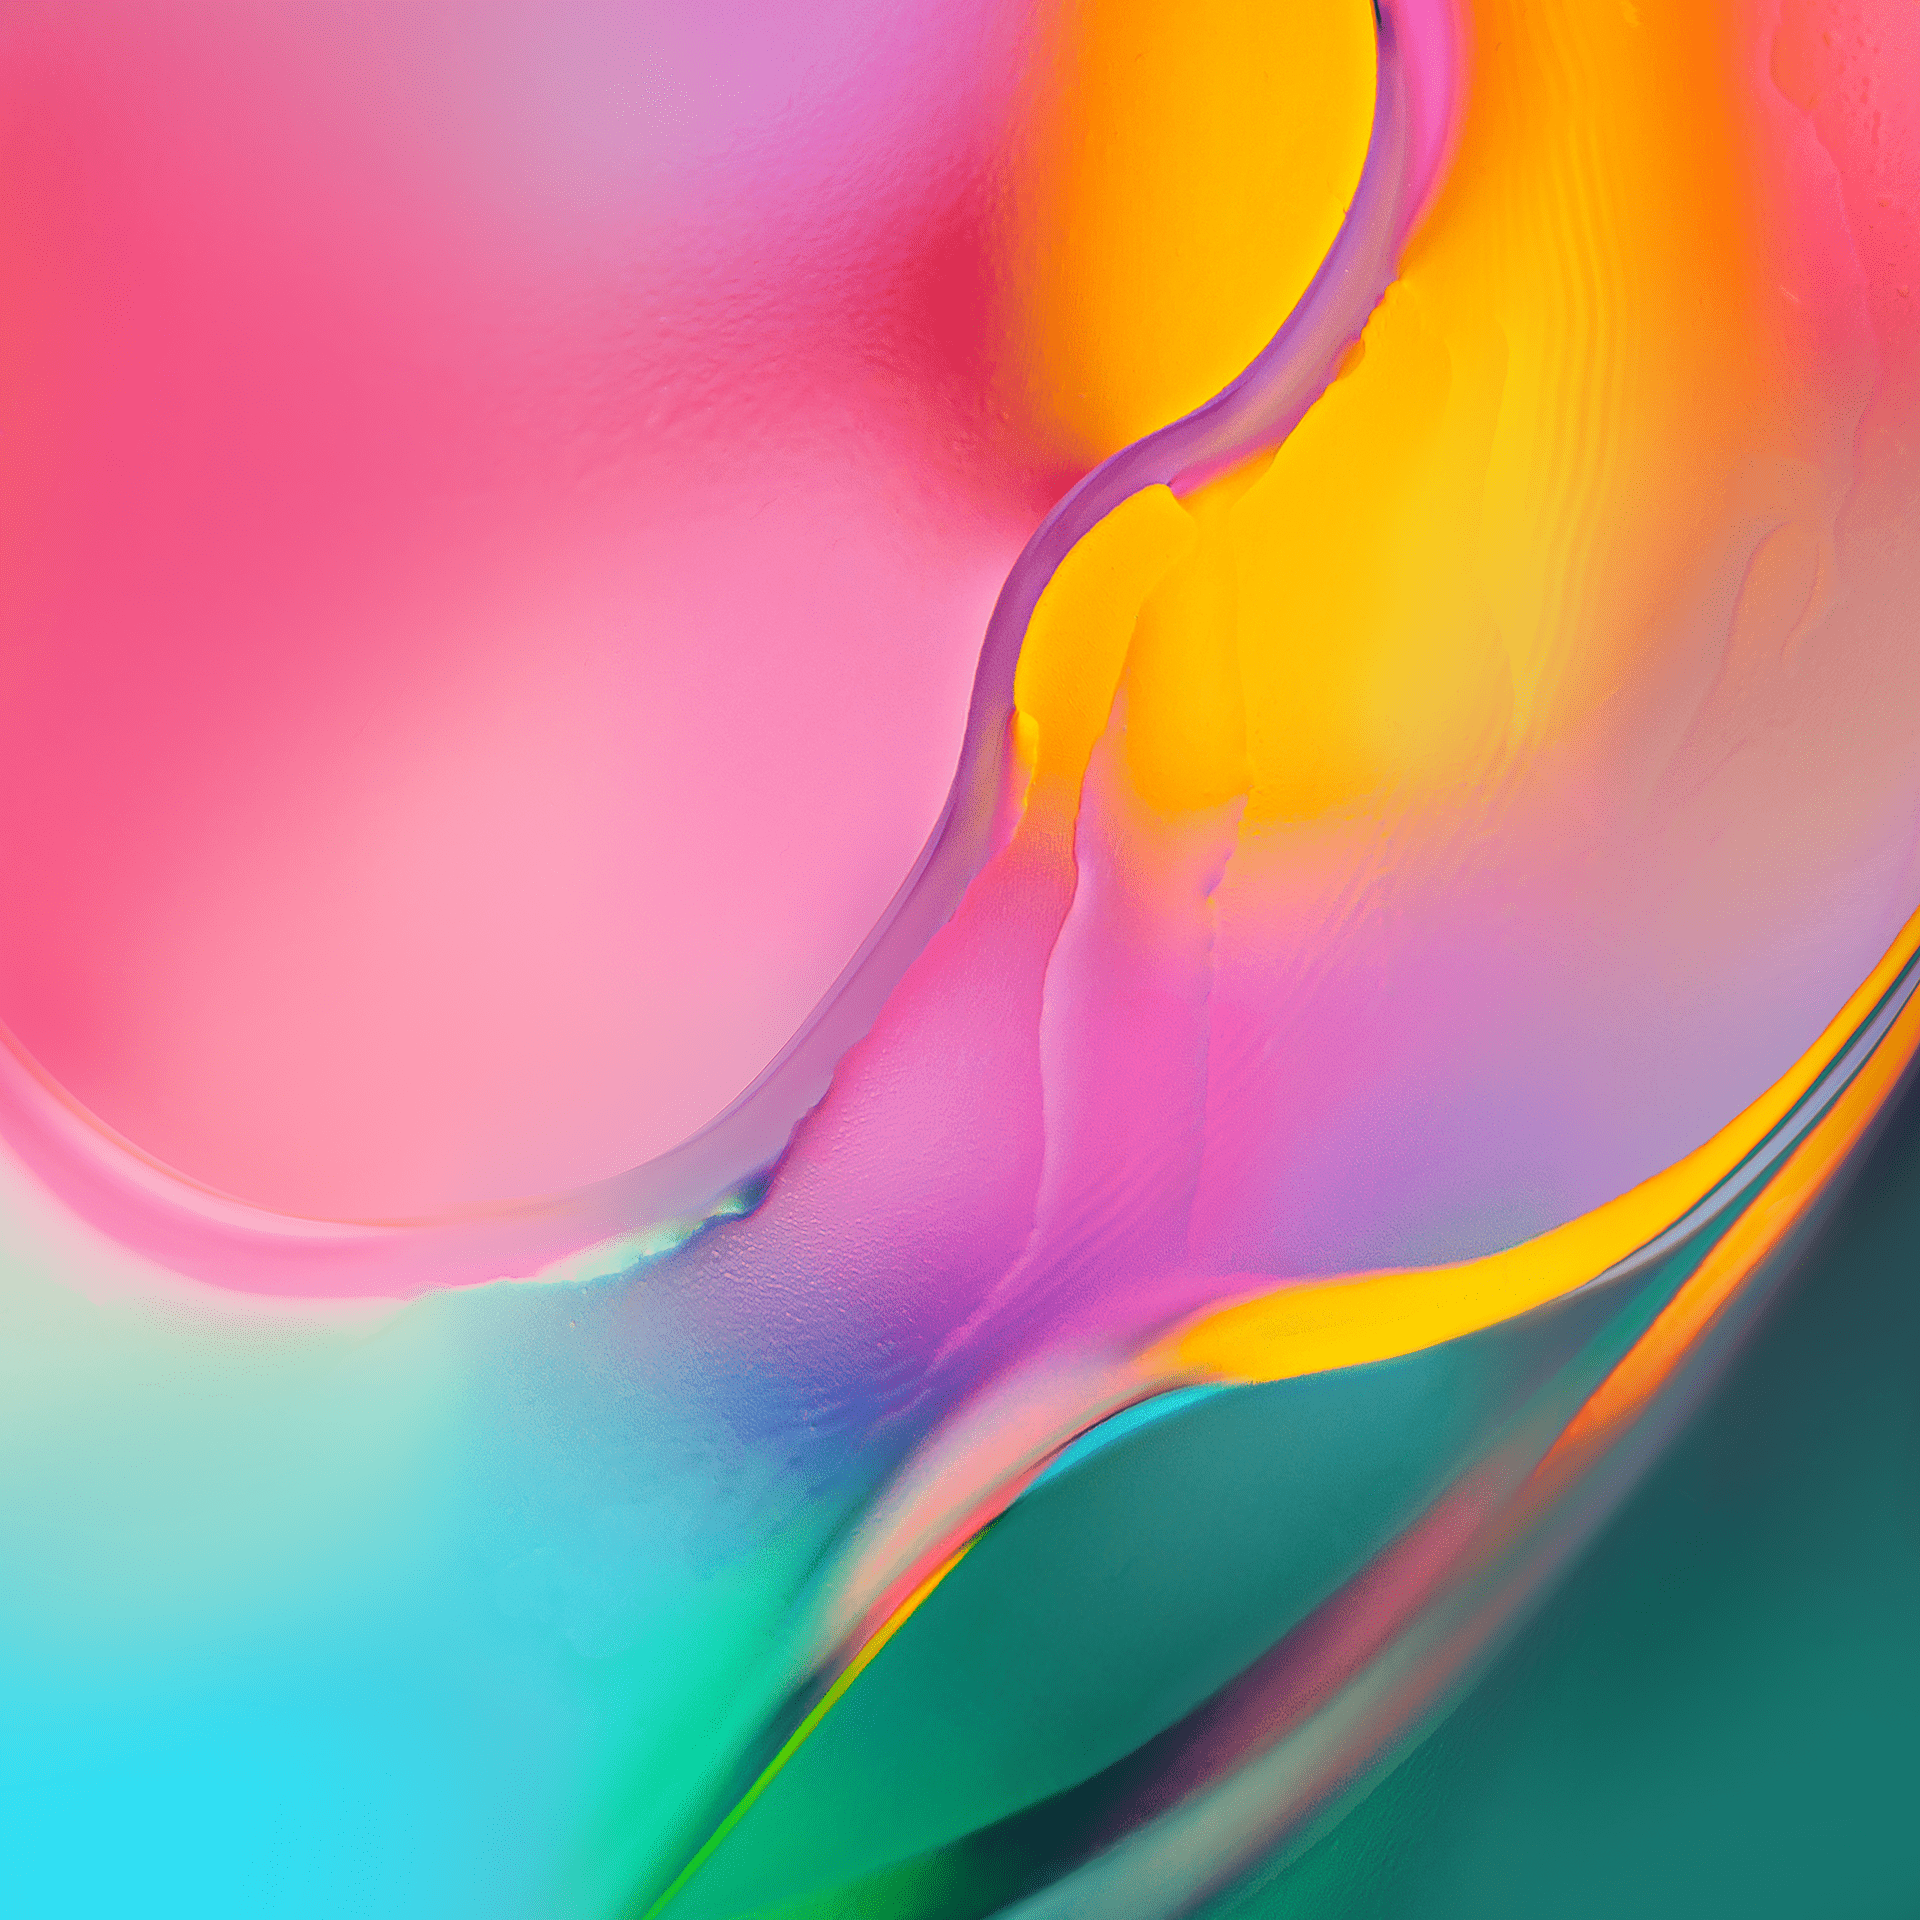 Download Samsung Galaxy Tab S5e Wallpapers [Abstract Designs]